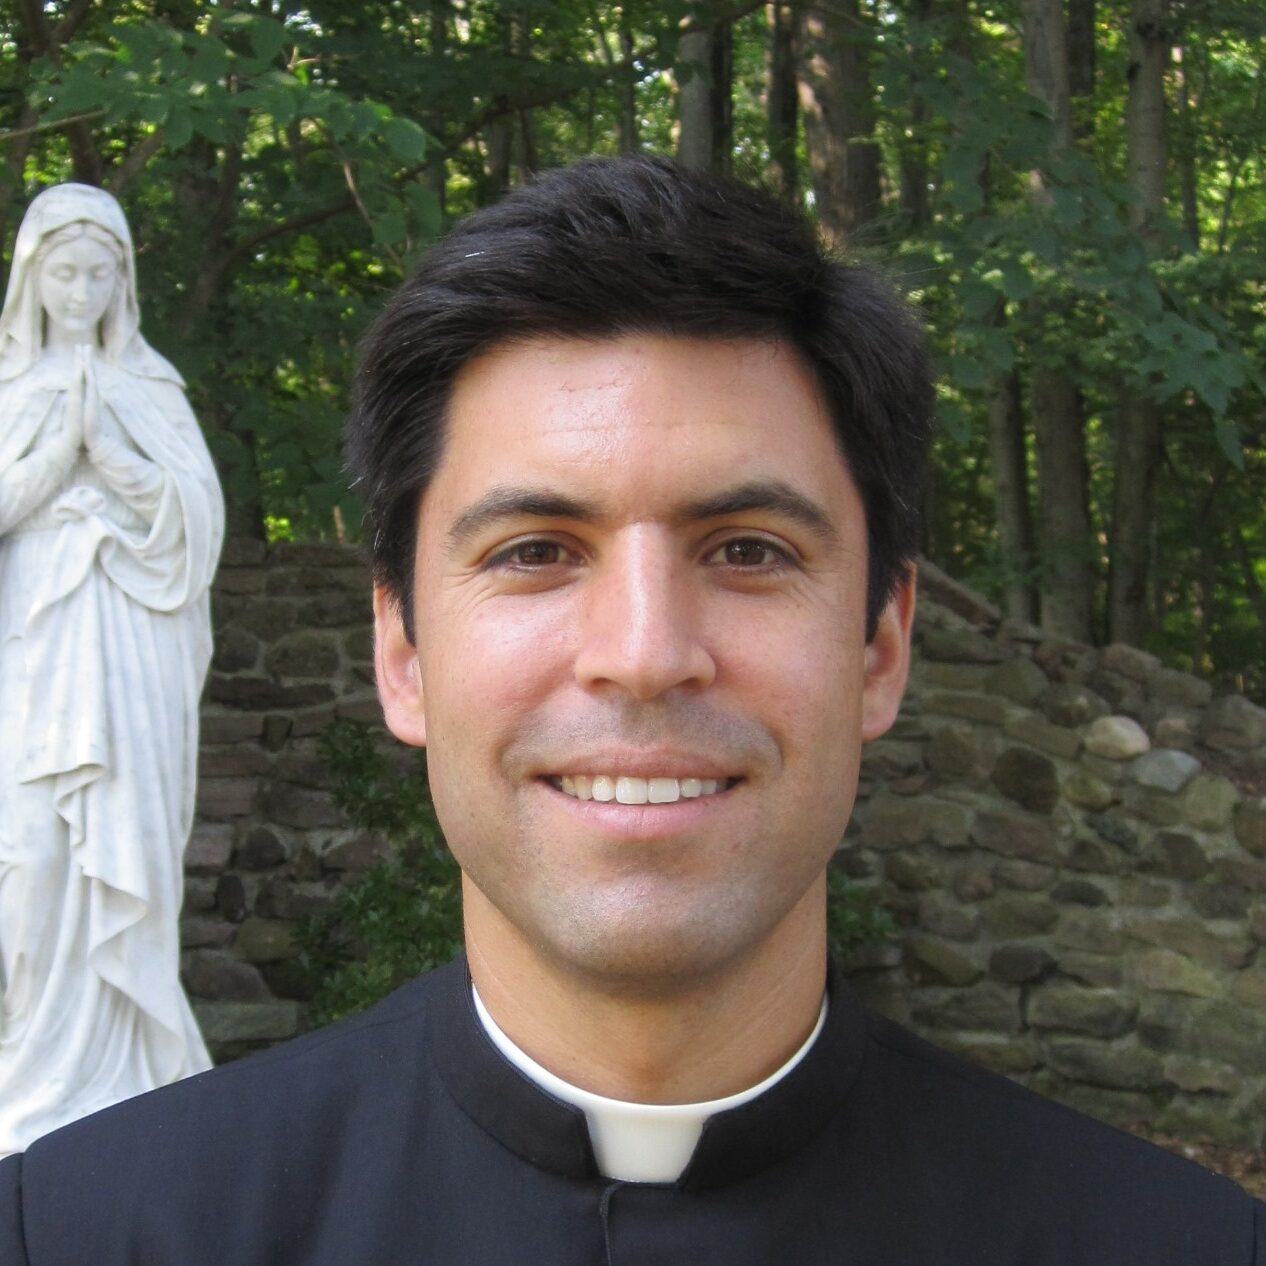 North American Territorial Director Appointed for a Second Term with a New  Council - Consecrated Women of Regnum Christi